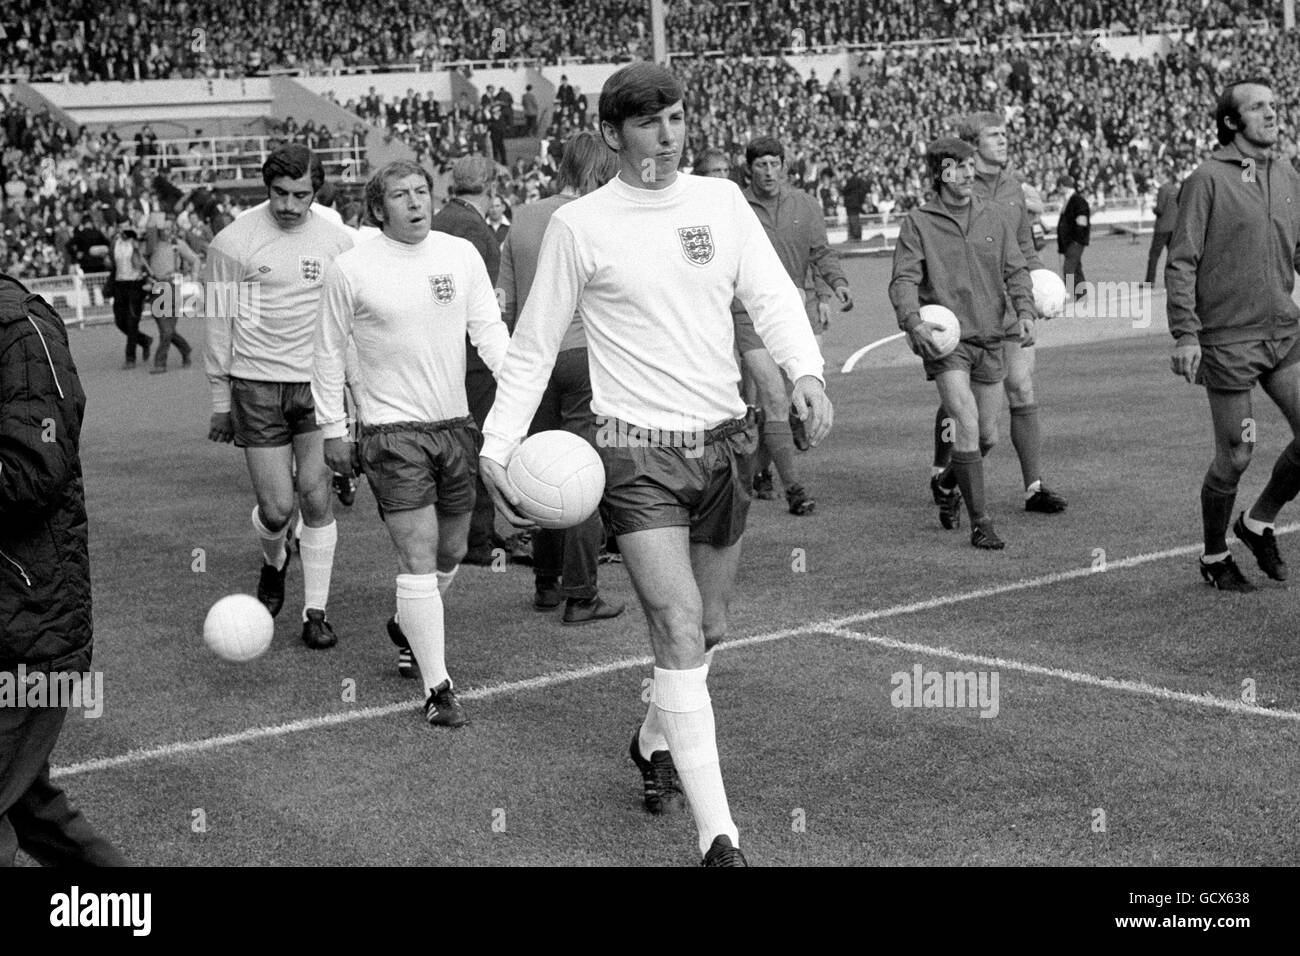 England's Martin Peters leads his team out at Wembley for his first match as captain. Following him are Ralph Coates and goalkeeper Gordon Banks. Stock Photo